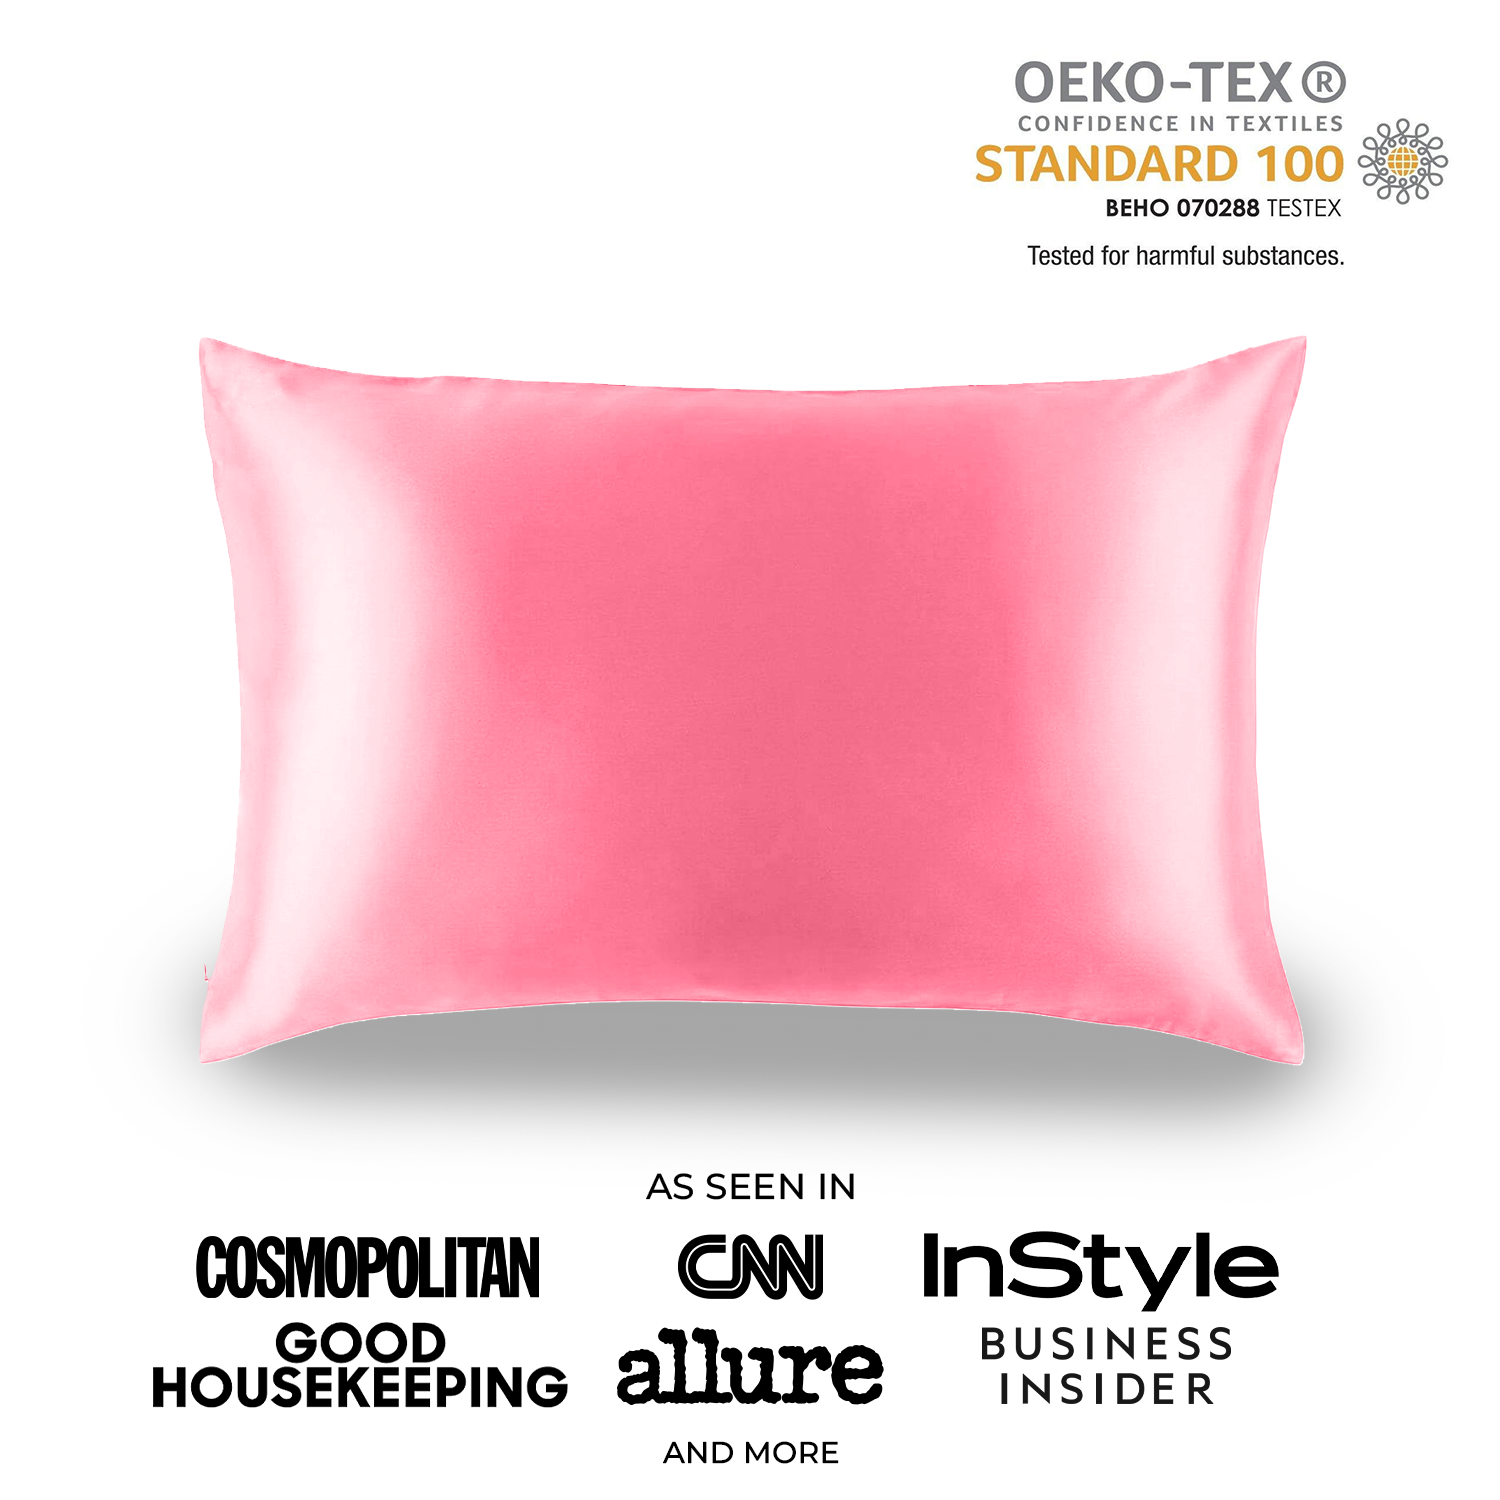 Natural Mulberry Silk Pillowcase (19 Momme) - MYK Silk #color_rose pink